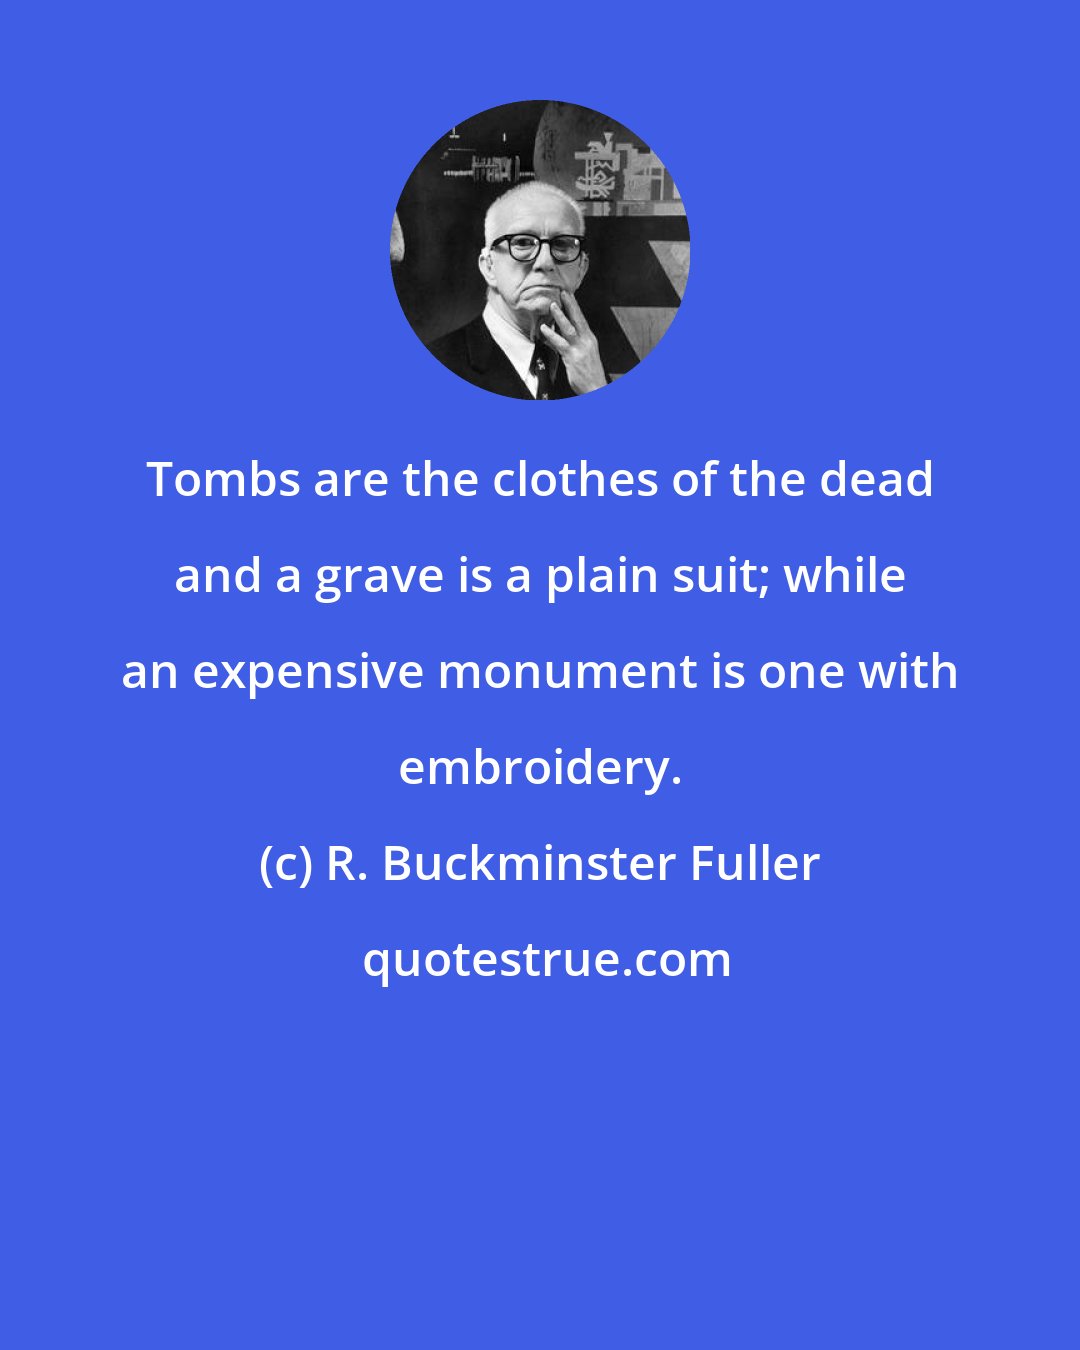 R. Buckminster Fuller: Tombs are the clothes of the dead and a grave is a plain suit; while an expensive monument is one with embroidery.